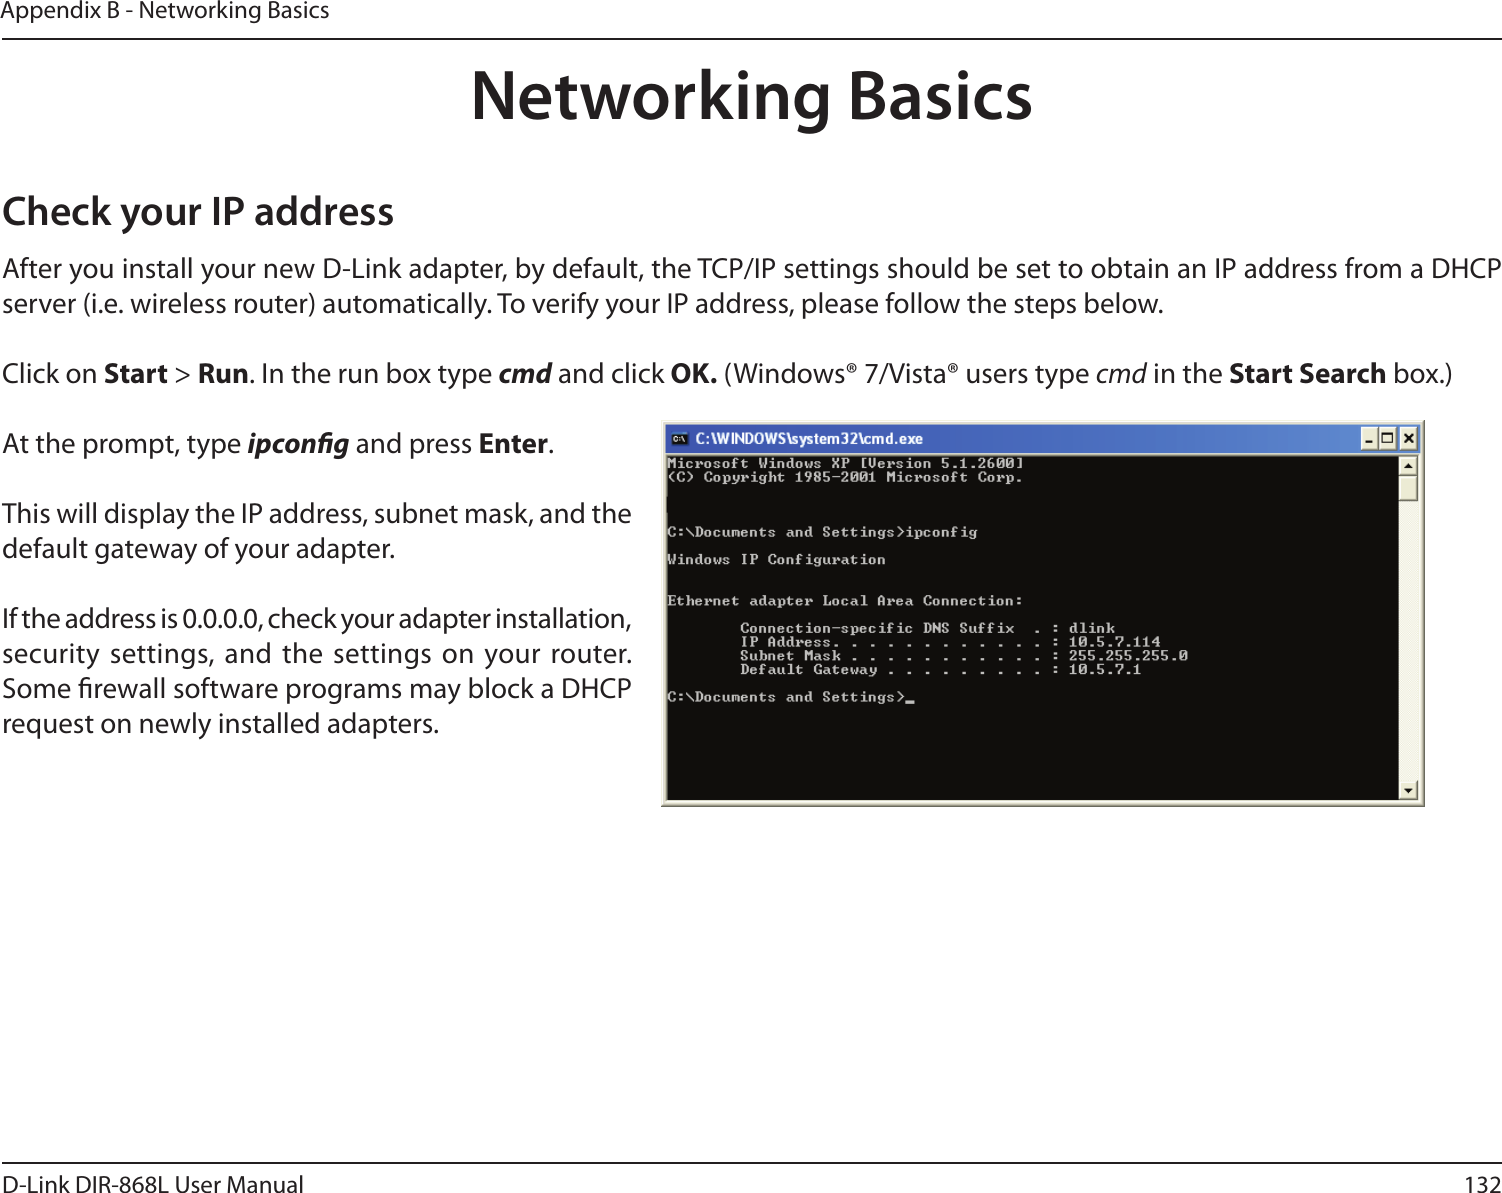 132D-Link DIR-868L User ManualAppendix B - Networking BasicsNetworking BasicsCheck your IP addressAfter you install your new D-Link adapter, by default, the TCP/IP settings should be set to obtain an IP address from a DHCP server (i.e. wireless router) automatically. To verify your IP address, please follow the steps below.Click on Start &gt; Run. In the run box type cmd and click OK. (Windows® 7/Vista® users type cmd in the Start Search box.)At the prompt, type ipcong and press Enter.This will display the IP address, subnet mask, and the default gateway of your adapter.If the address is 0.0.0.0, check your adapter installation, security  settings, and the settings on your router. Some rewall software programs may block a DHCP request on newly installed adapters. 